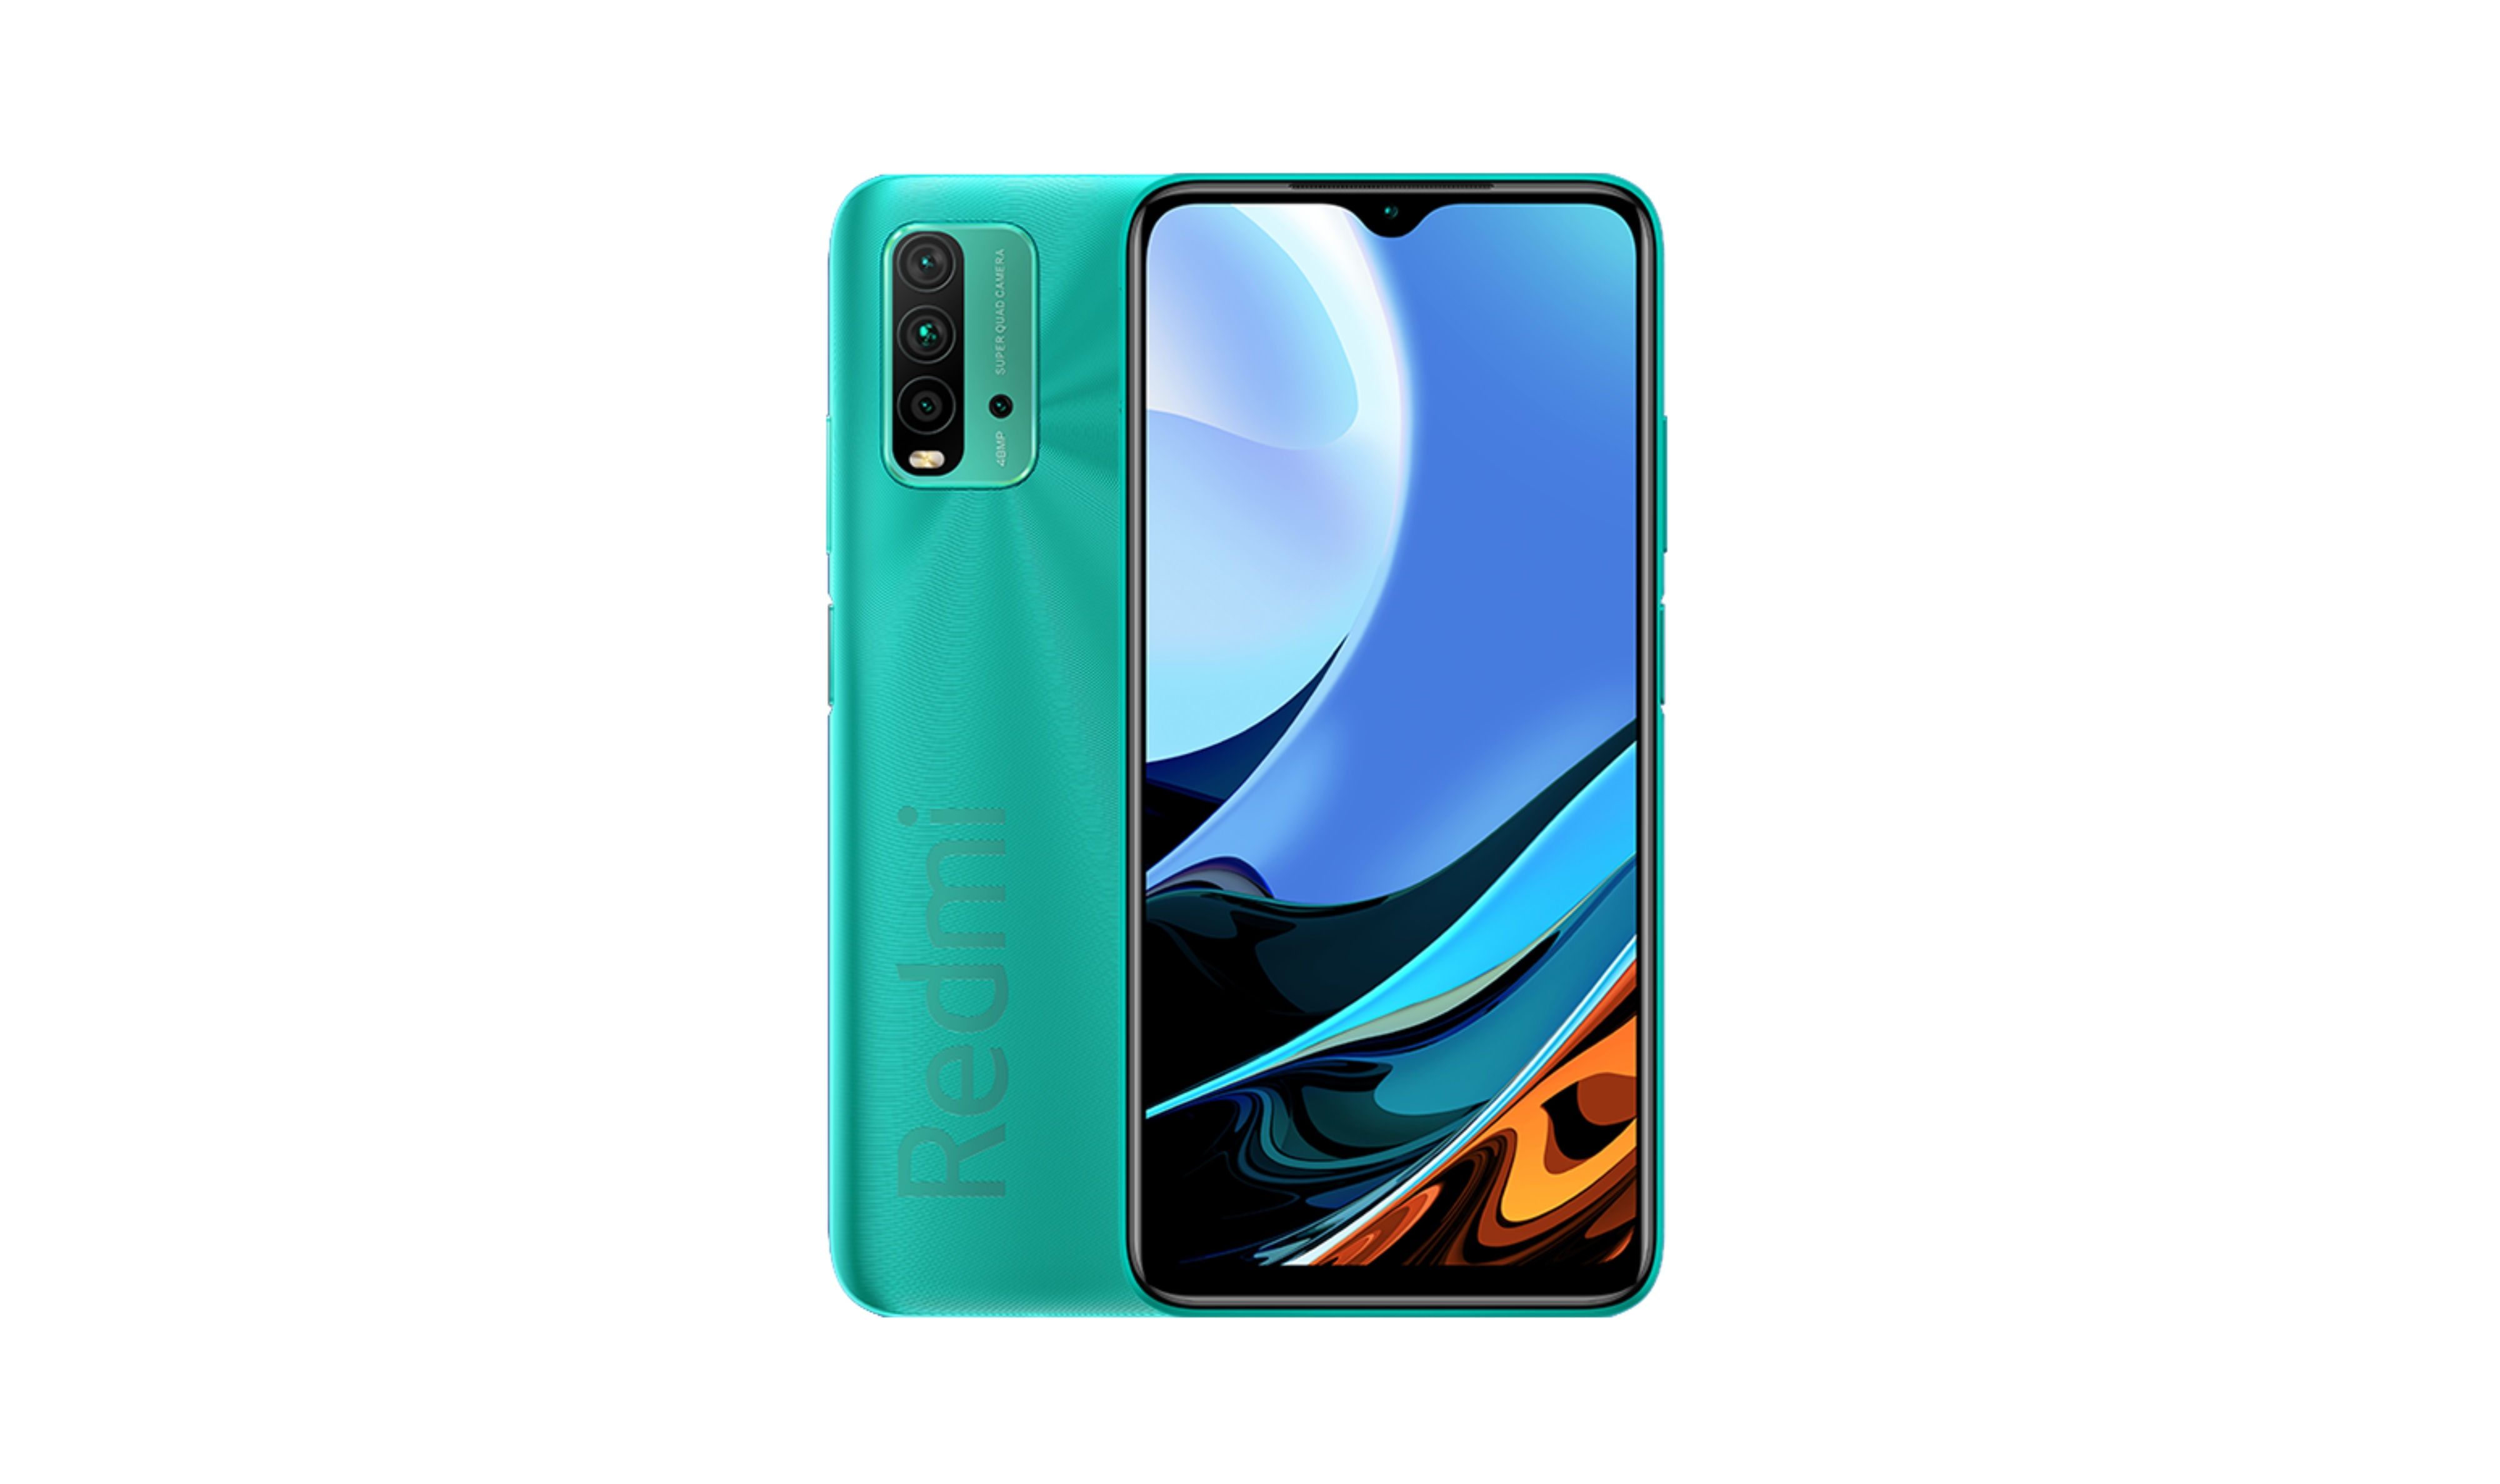 Redmi 9 Power 6GB + 128GB variant launched in India for ₹12,999 ($180) -  Gizmochina